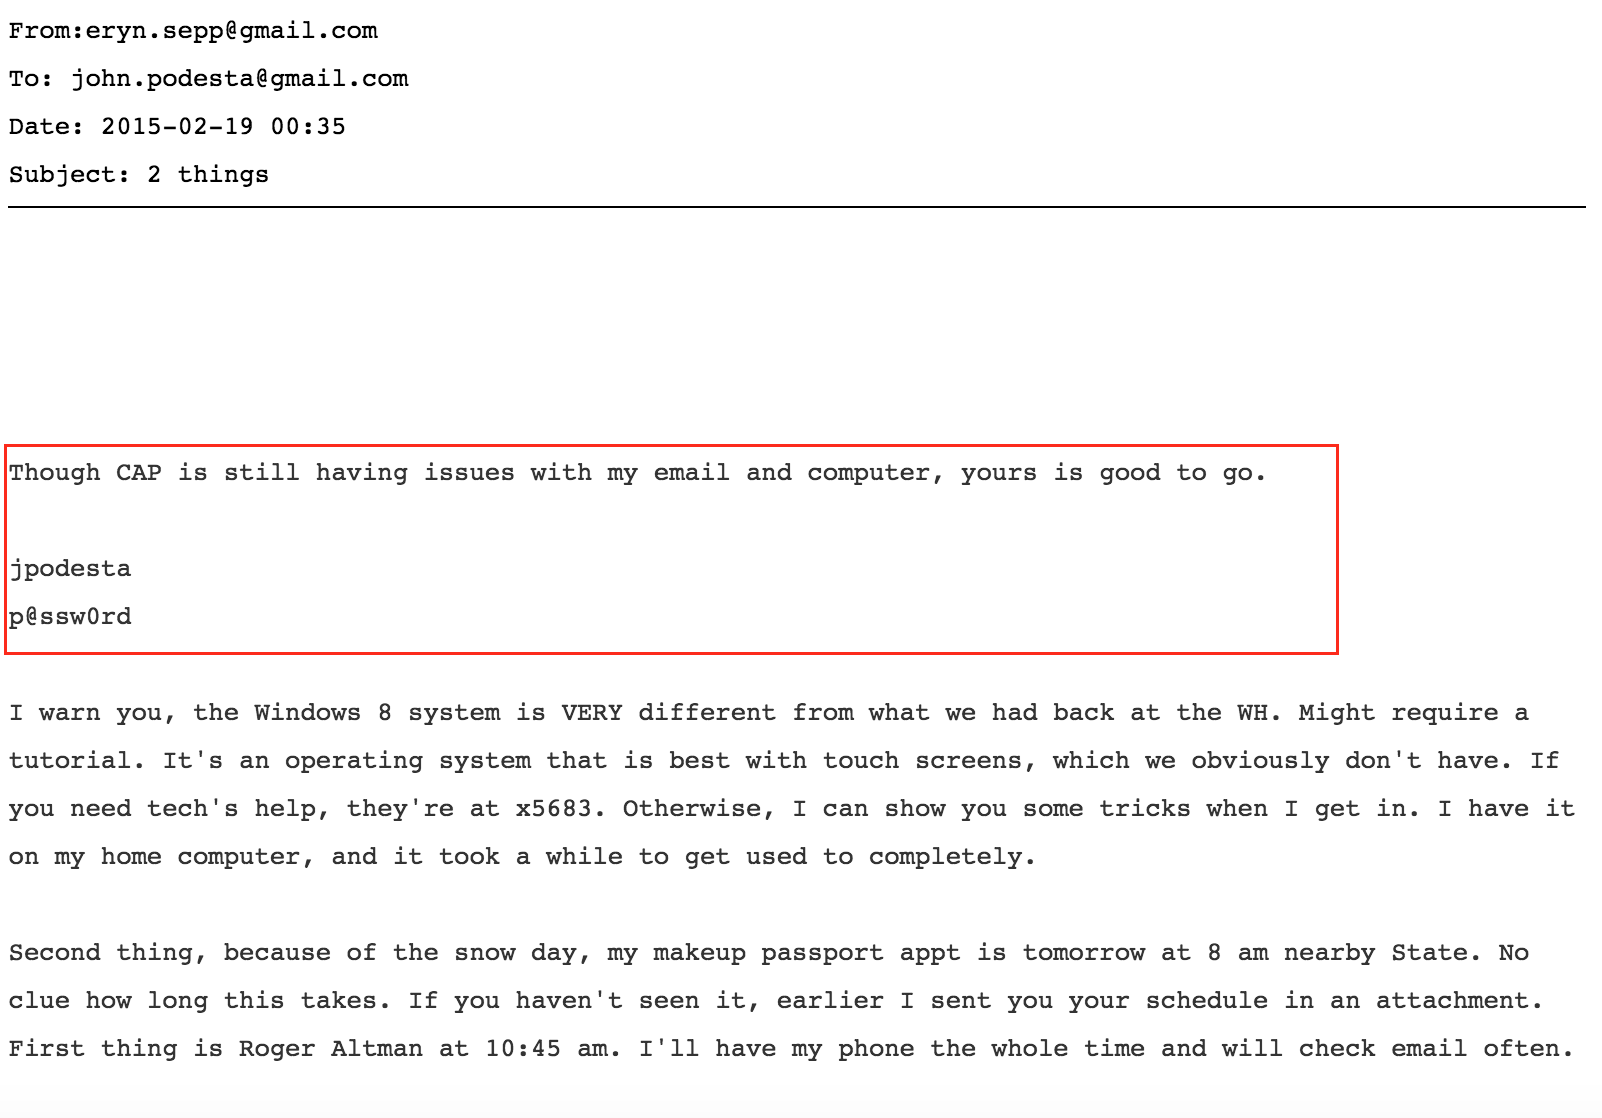 Podesta lost phone email password